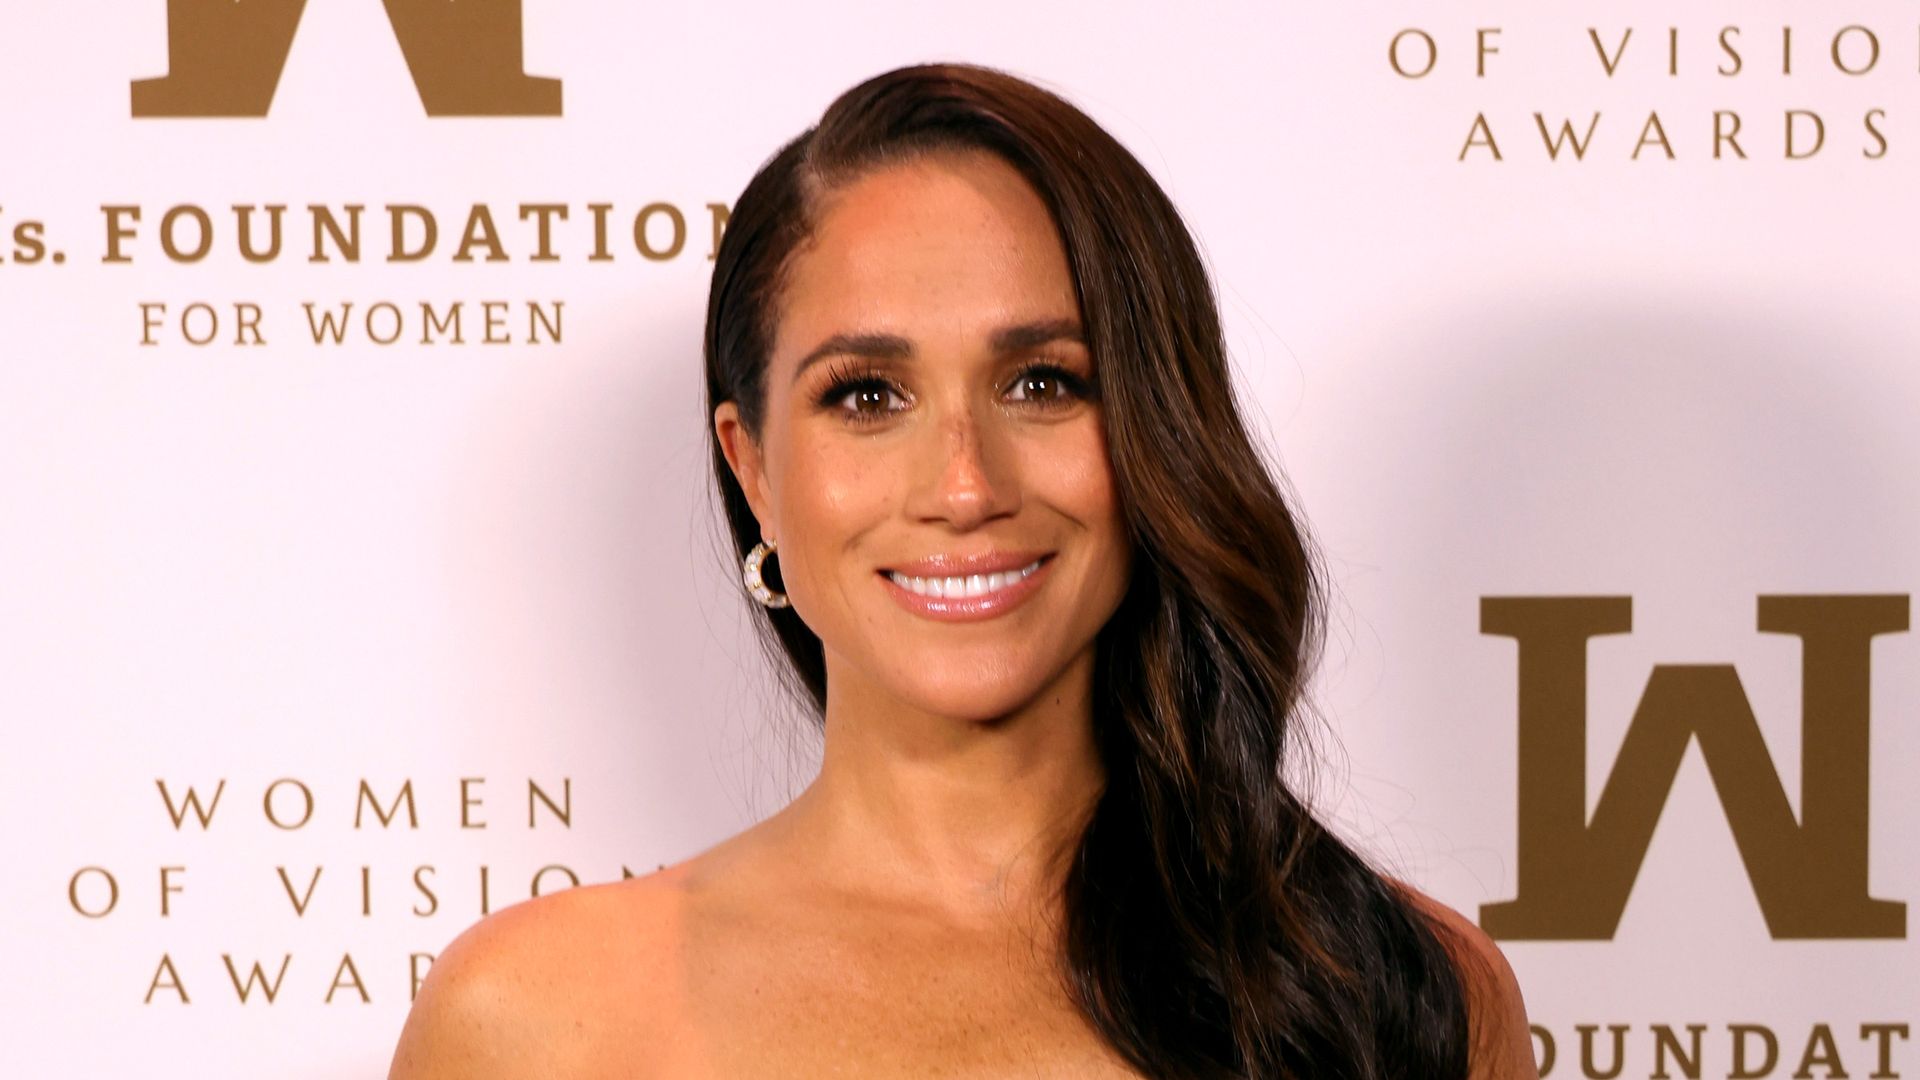 Meghan, The Duchess of Sussex, at the Women of Vision Awards